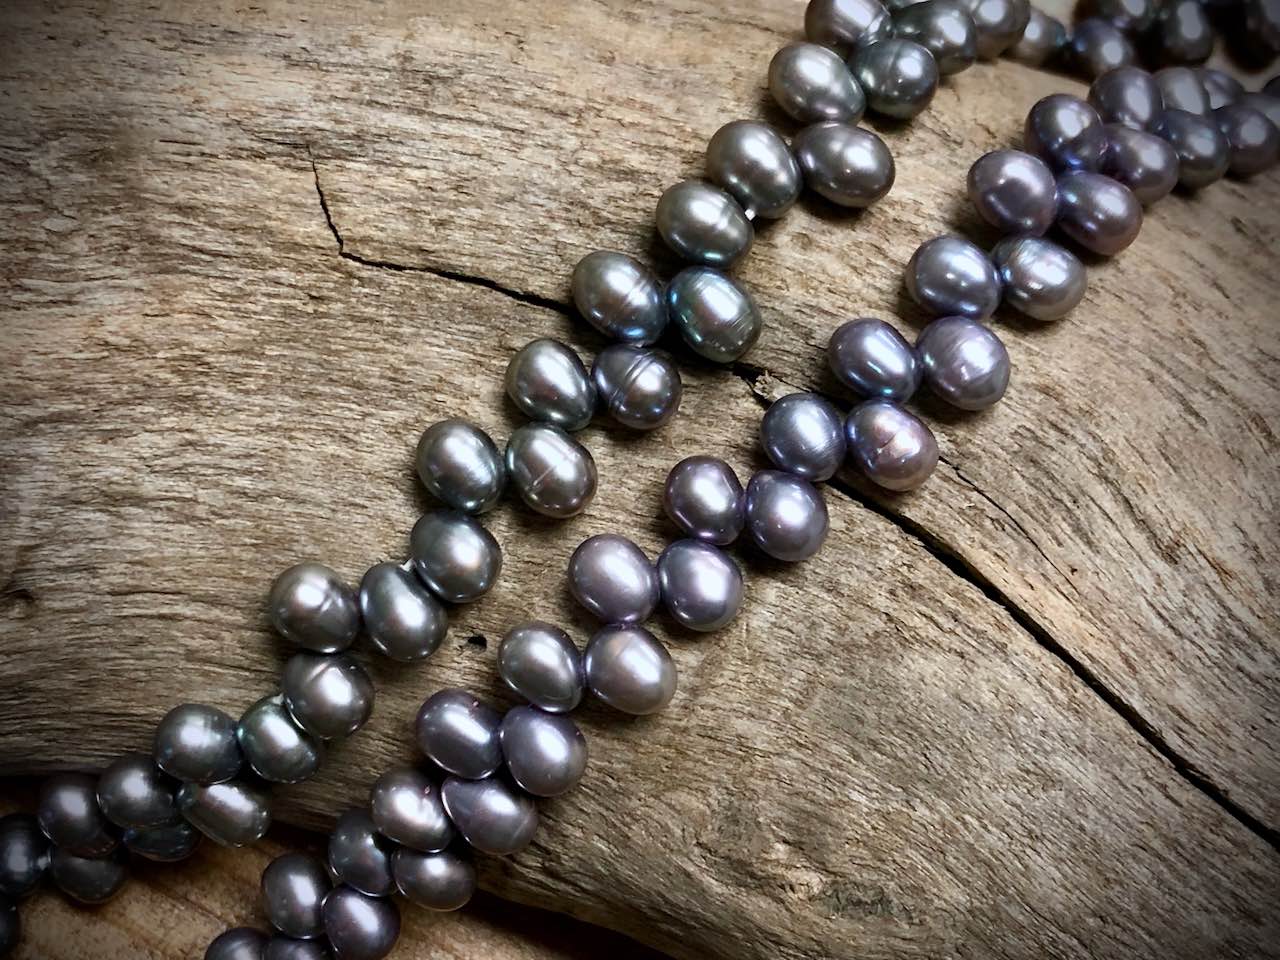 Old-Stock, Vintage Freshwater Pearls - 5mm x 6mm - 16”